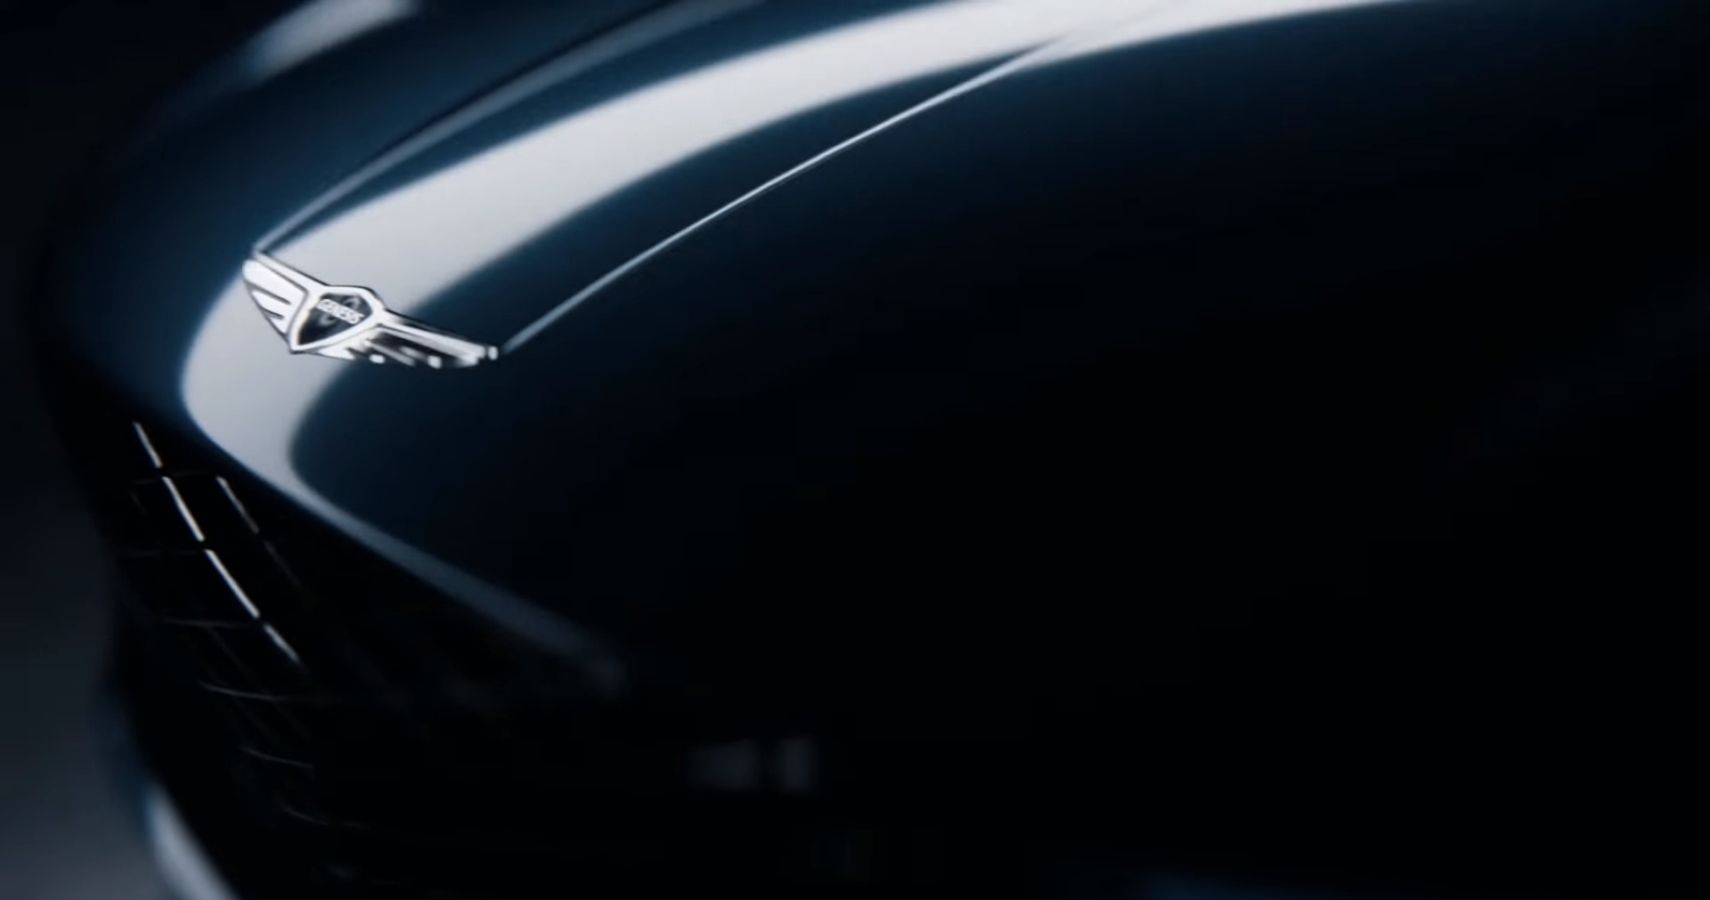 Genesis Teaser for A EV Concept To Debut Later This Week